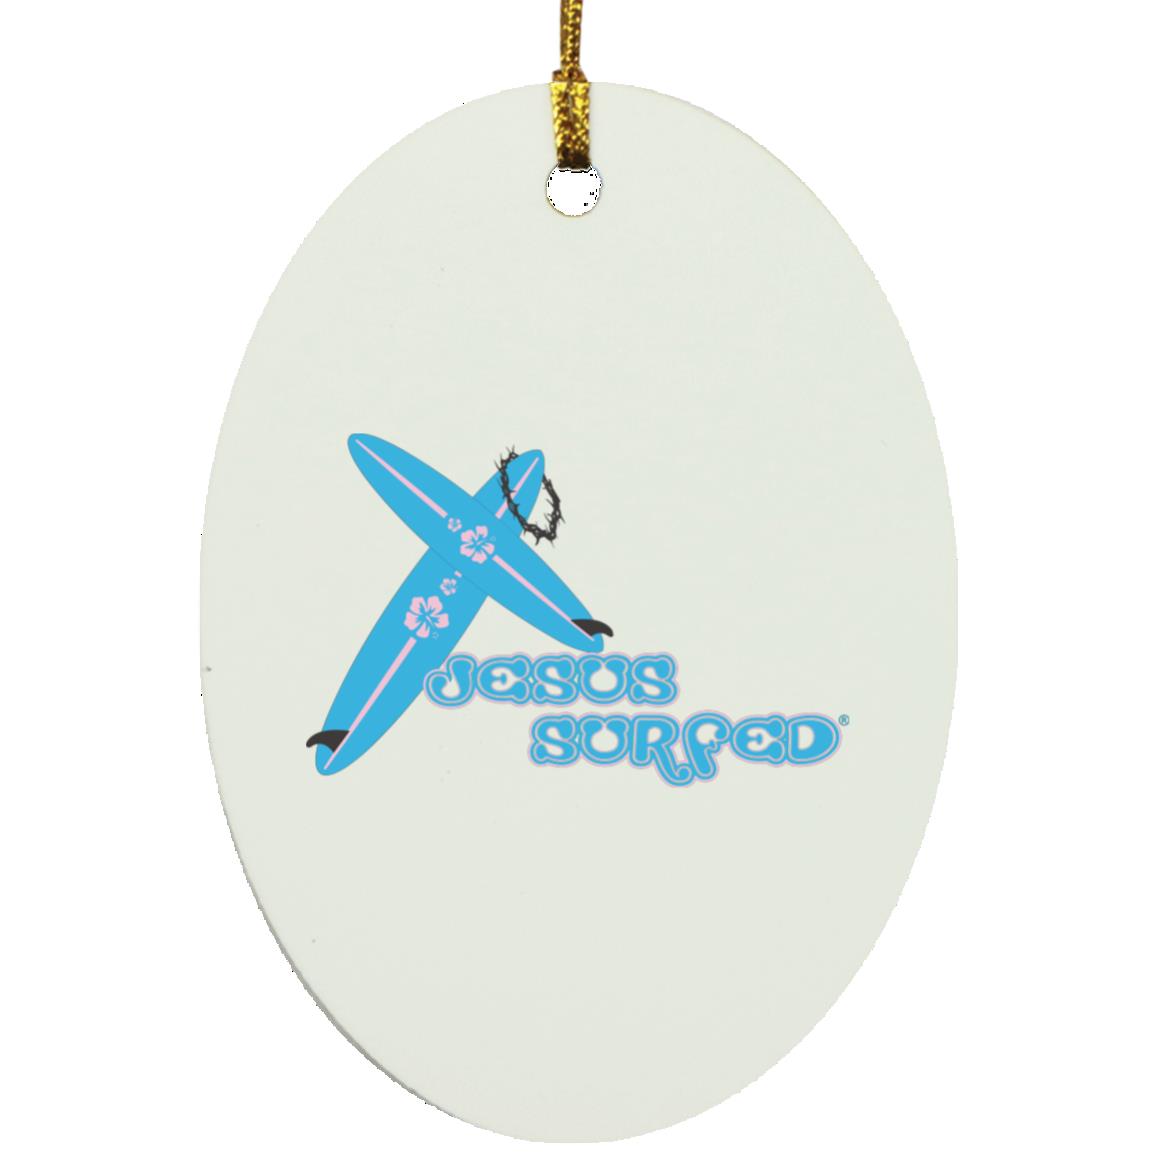 Crossboards Oval Ornament